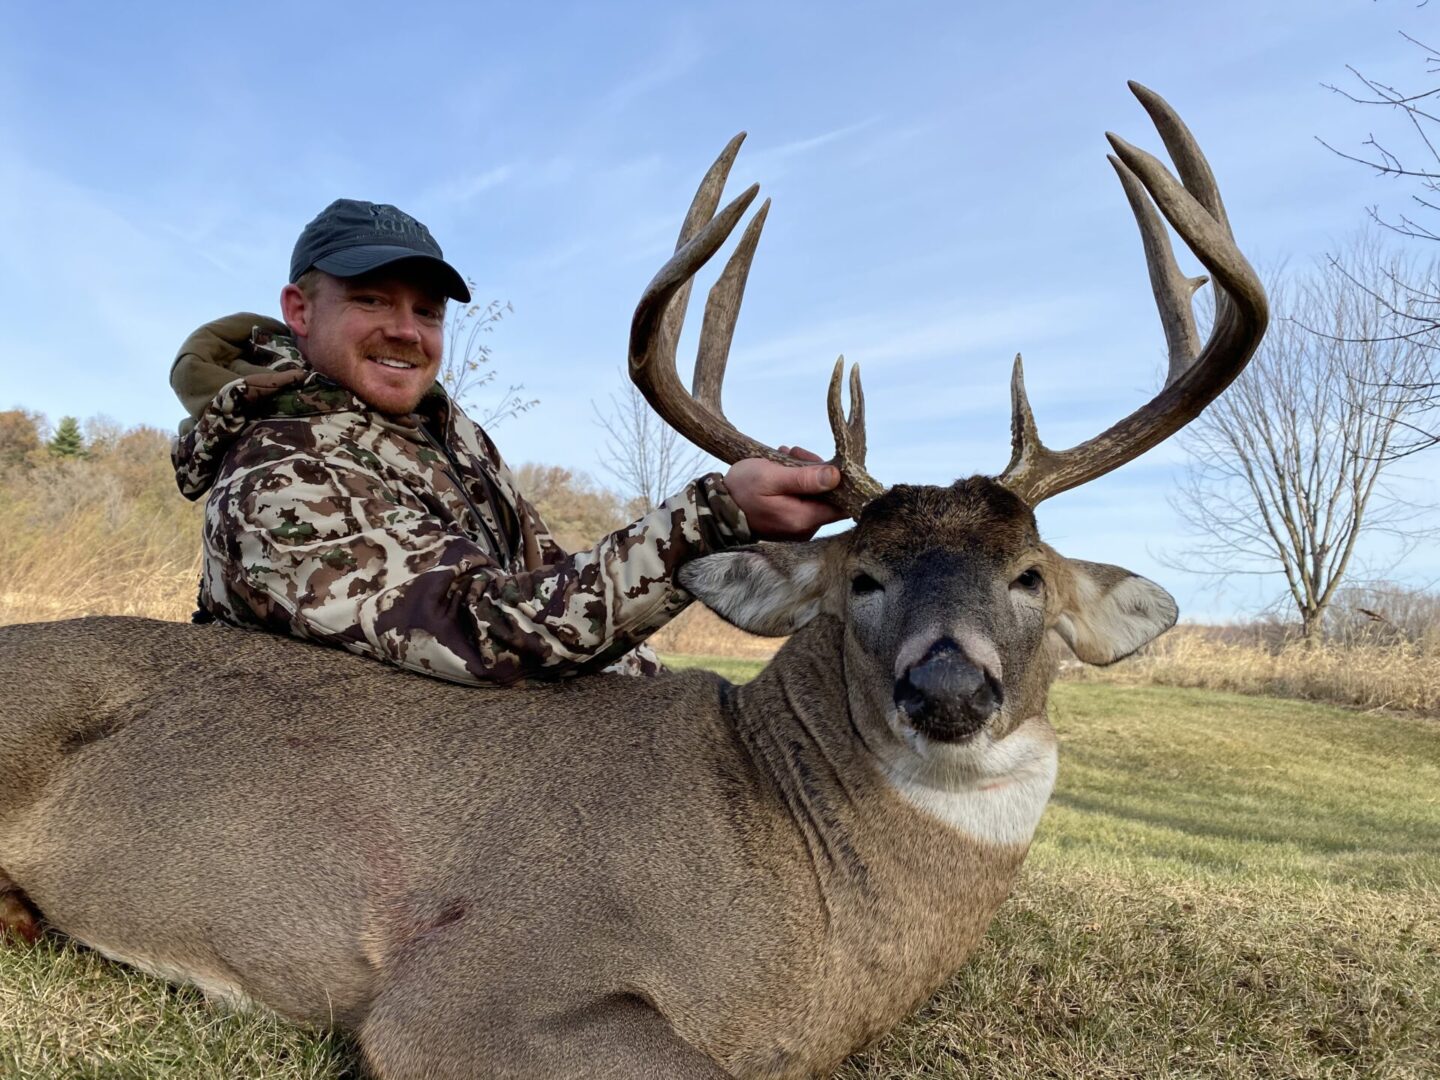 A man with a camouflage jacket holding a dead deer by the antlers